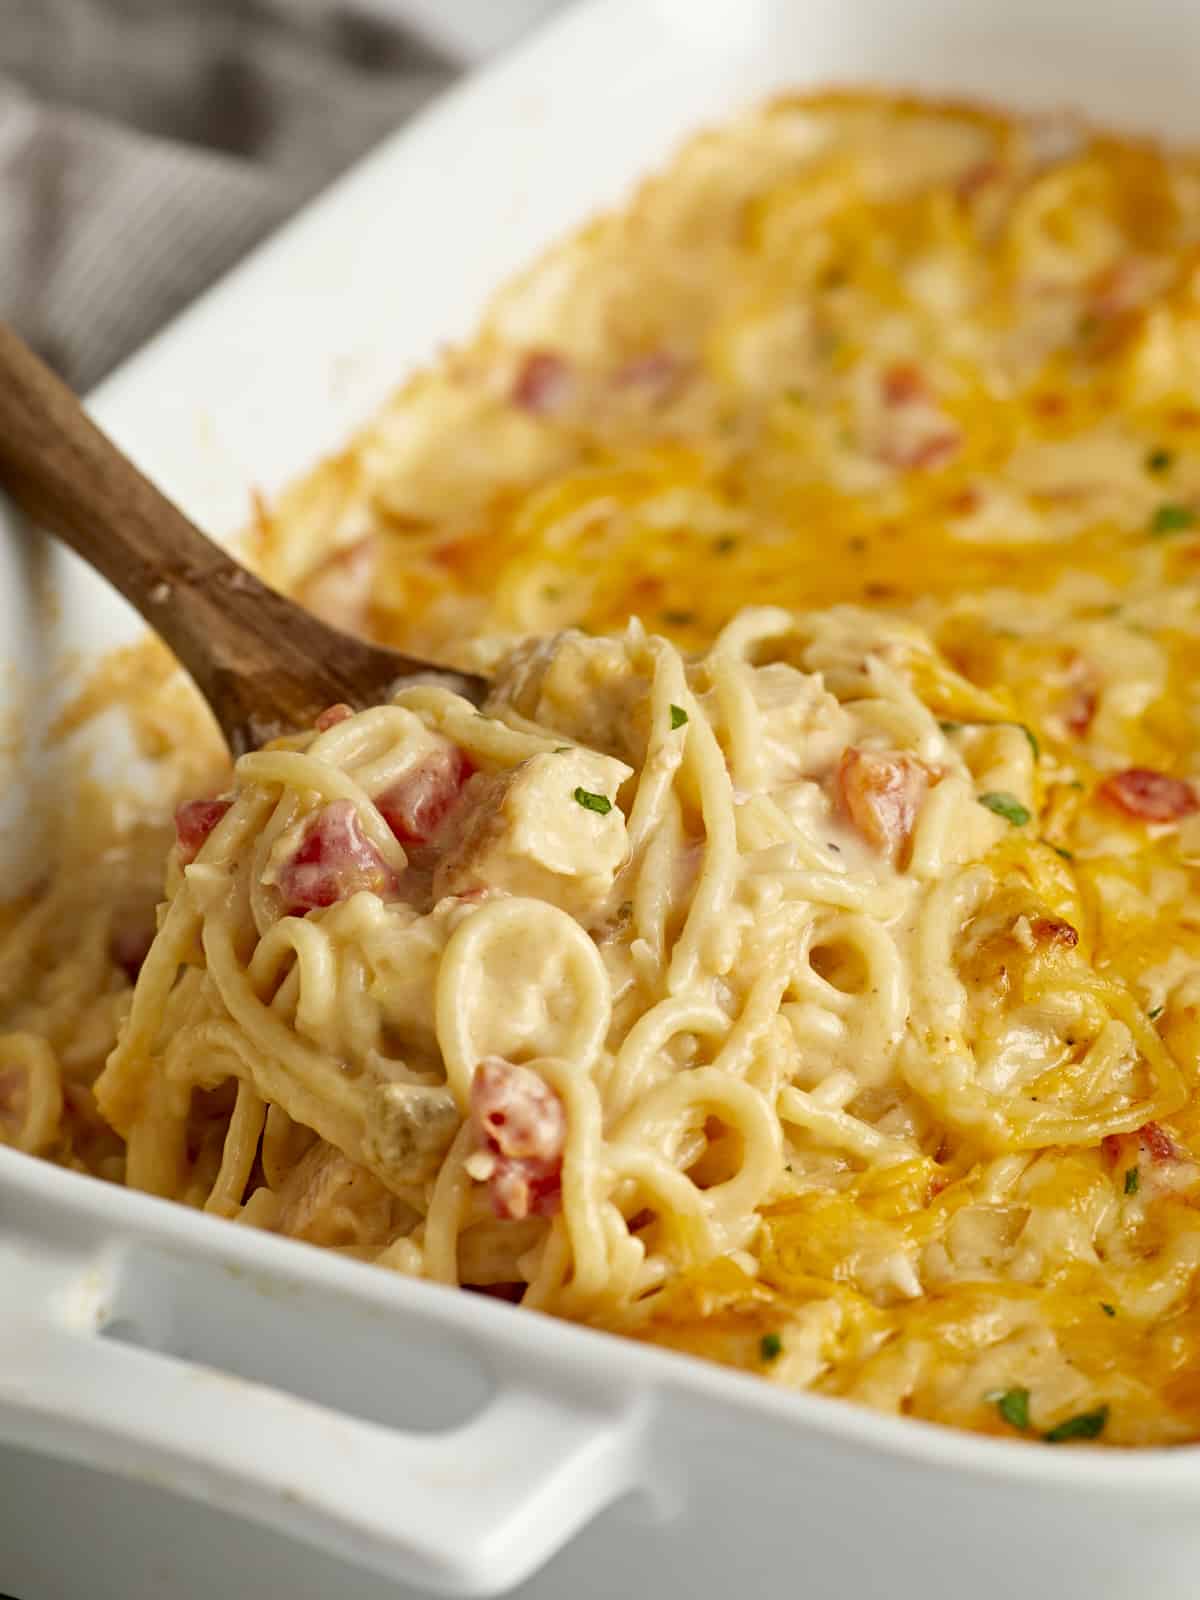 Side close up view of chicken spaghetti in a casserole dish with a wooden spoon lifting some out.